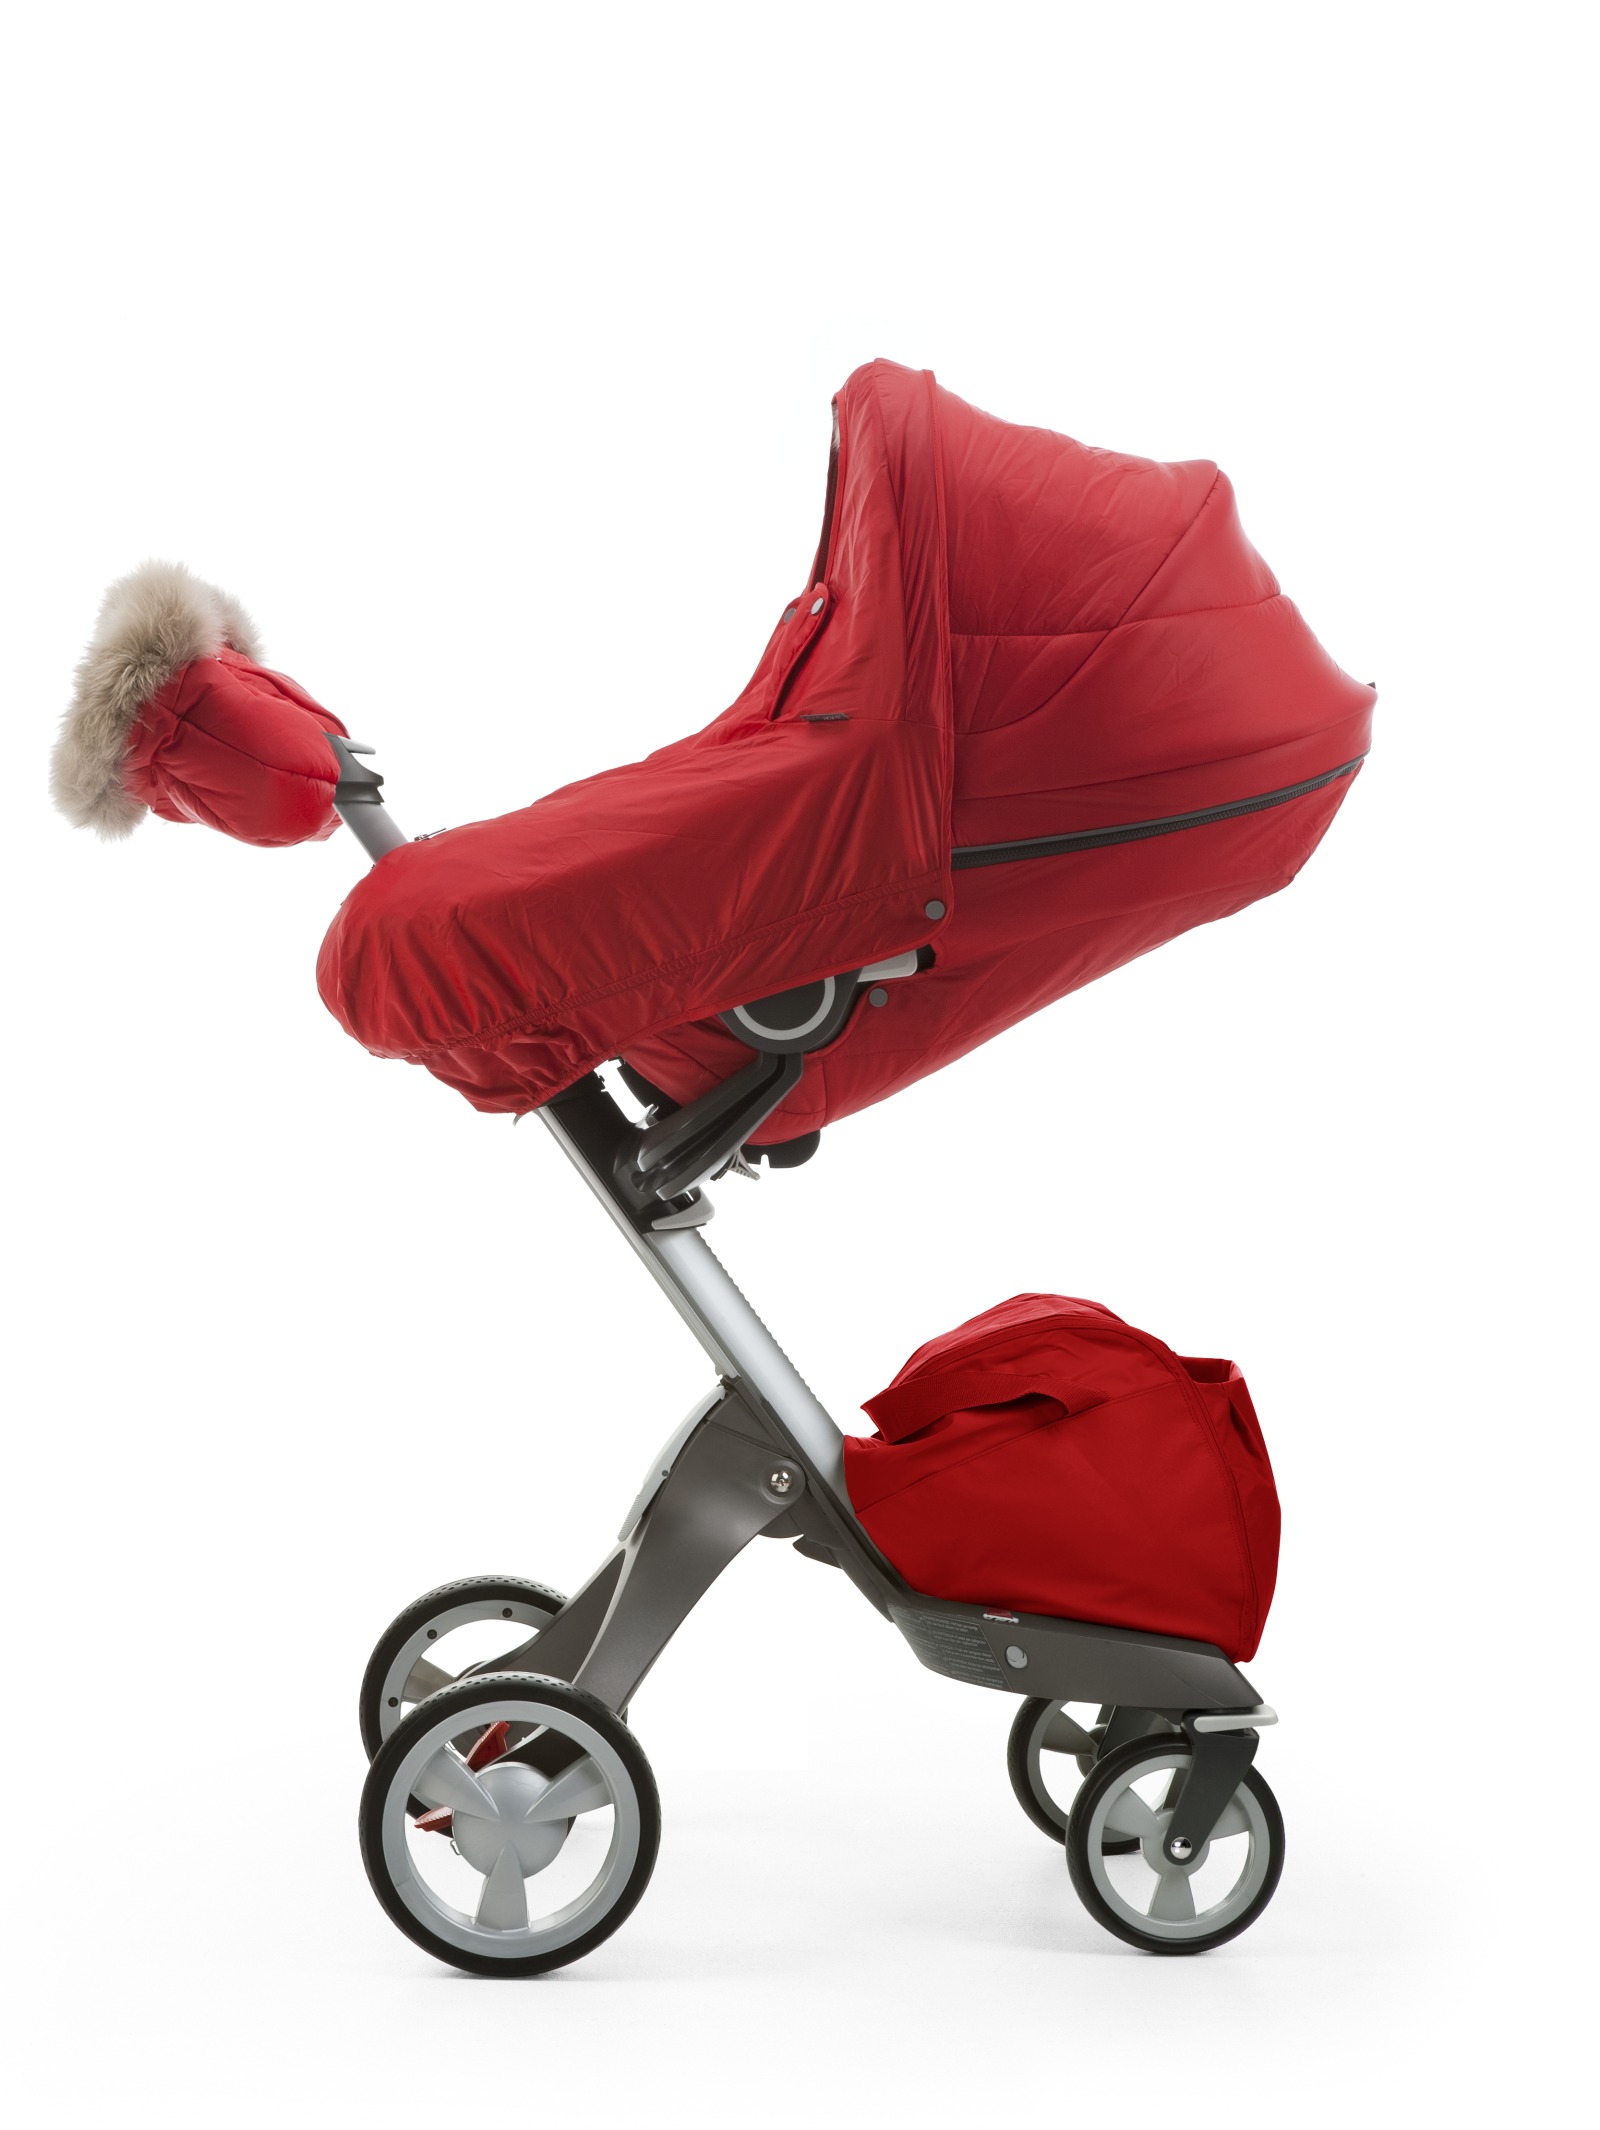 cosatto giggle travel system reviews